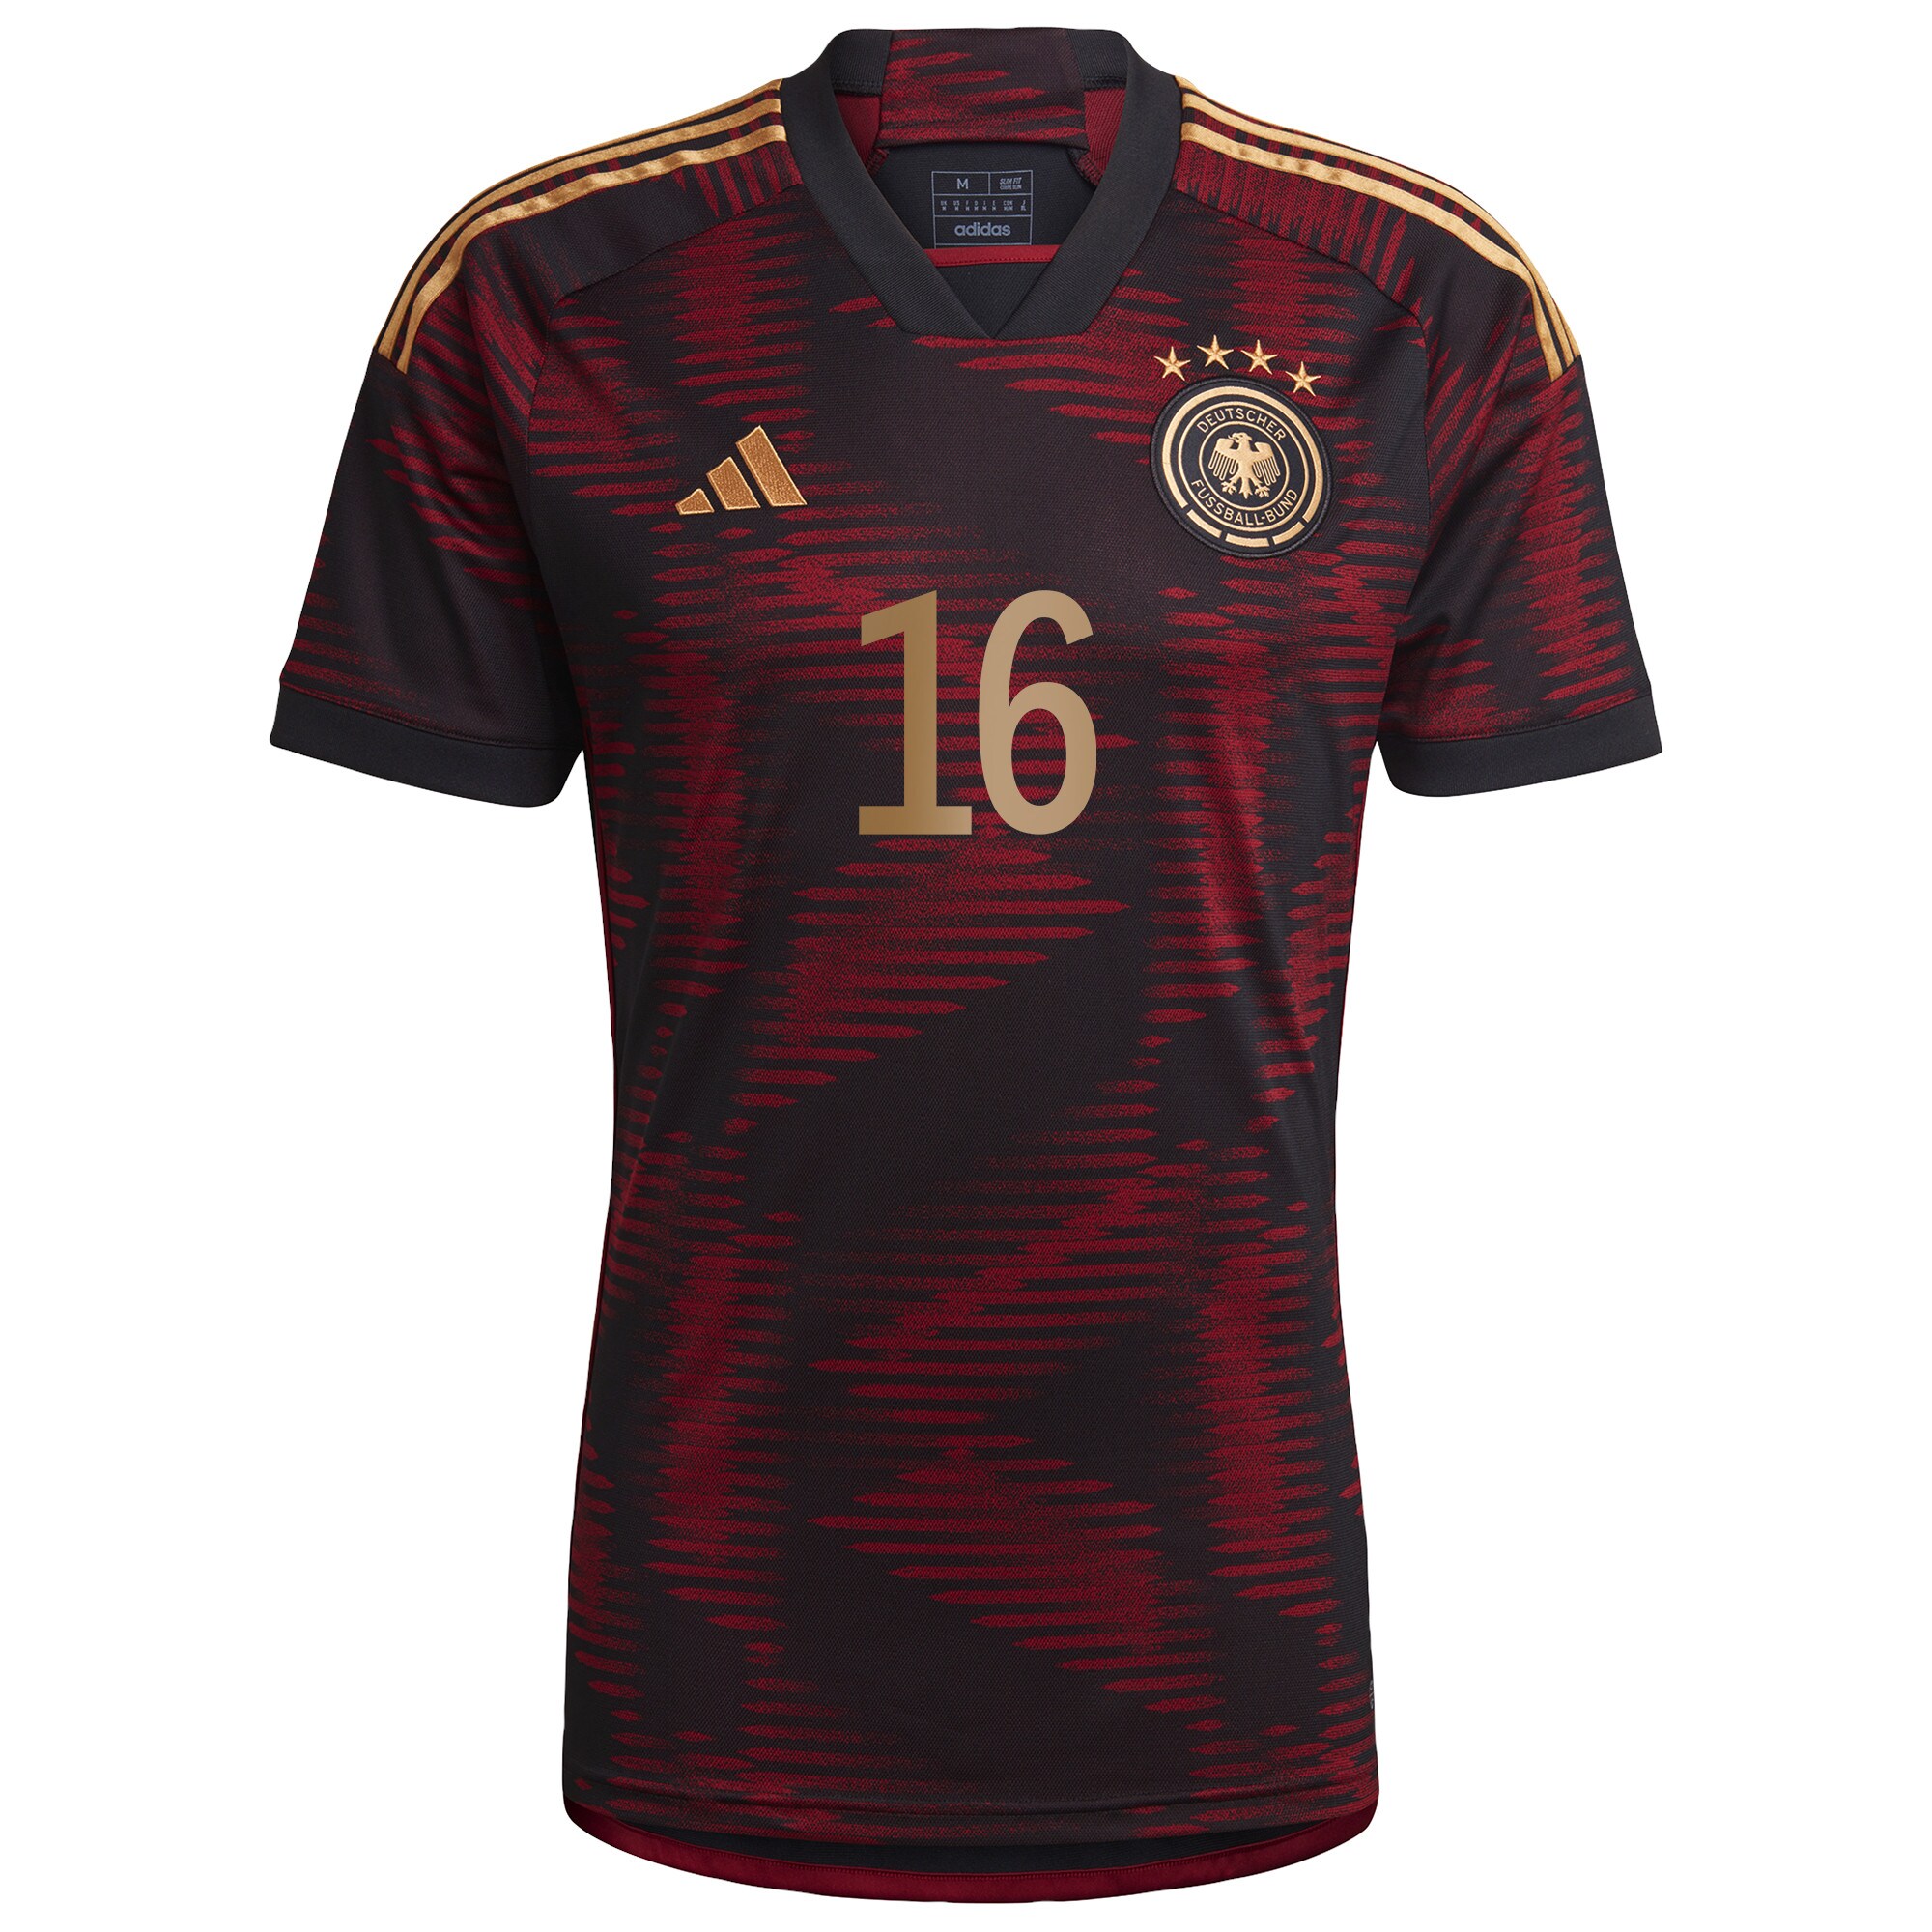 Germany Away Shirt with Klostermann 16 printing